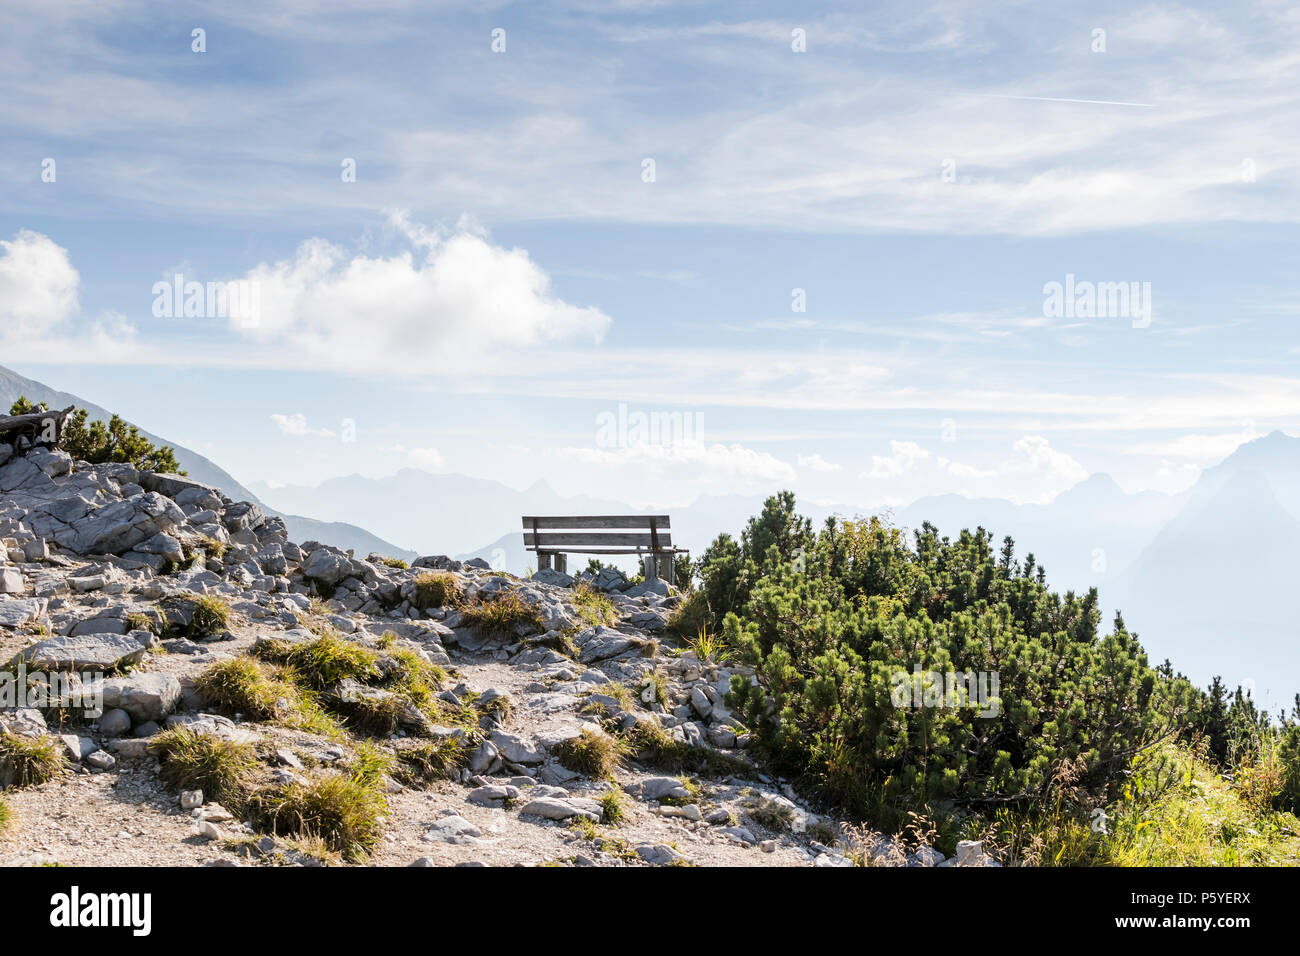 Empty park bench in high mountains, view from Eagles nest in the bavarian Alps near Berchtesgaden in Germany Stock Photo